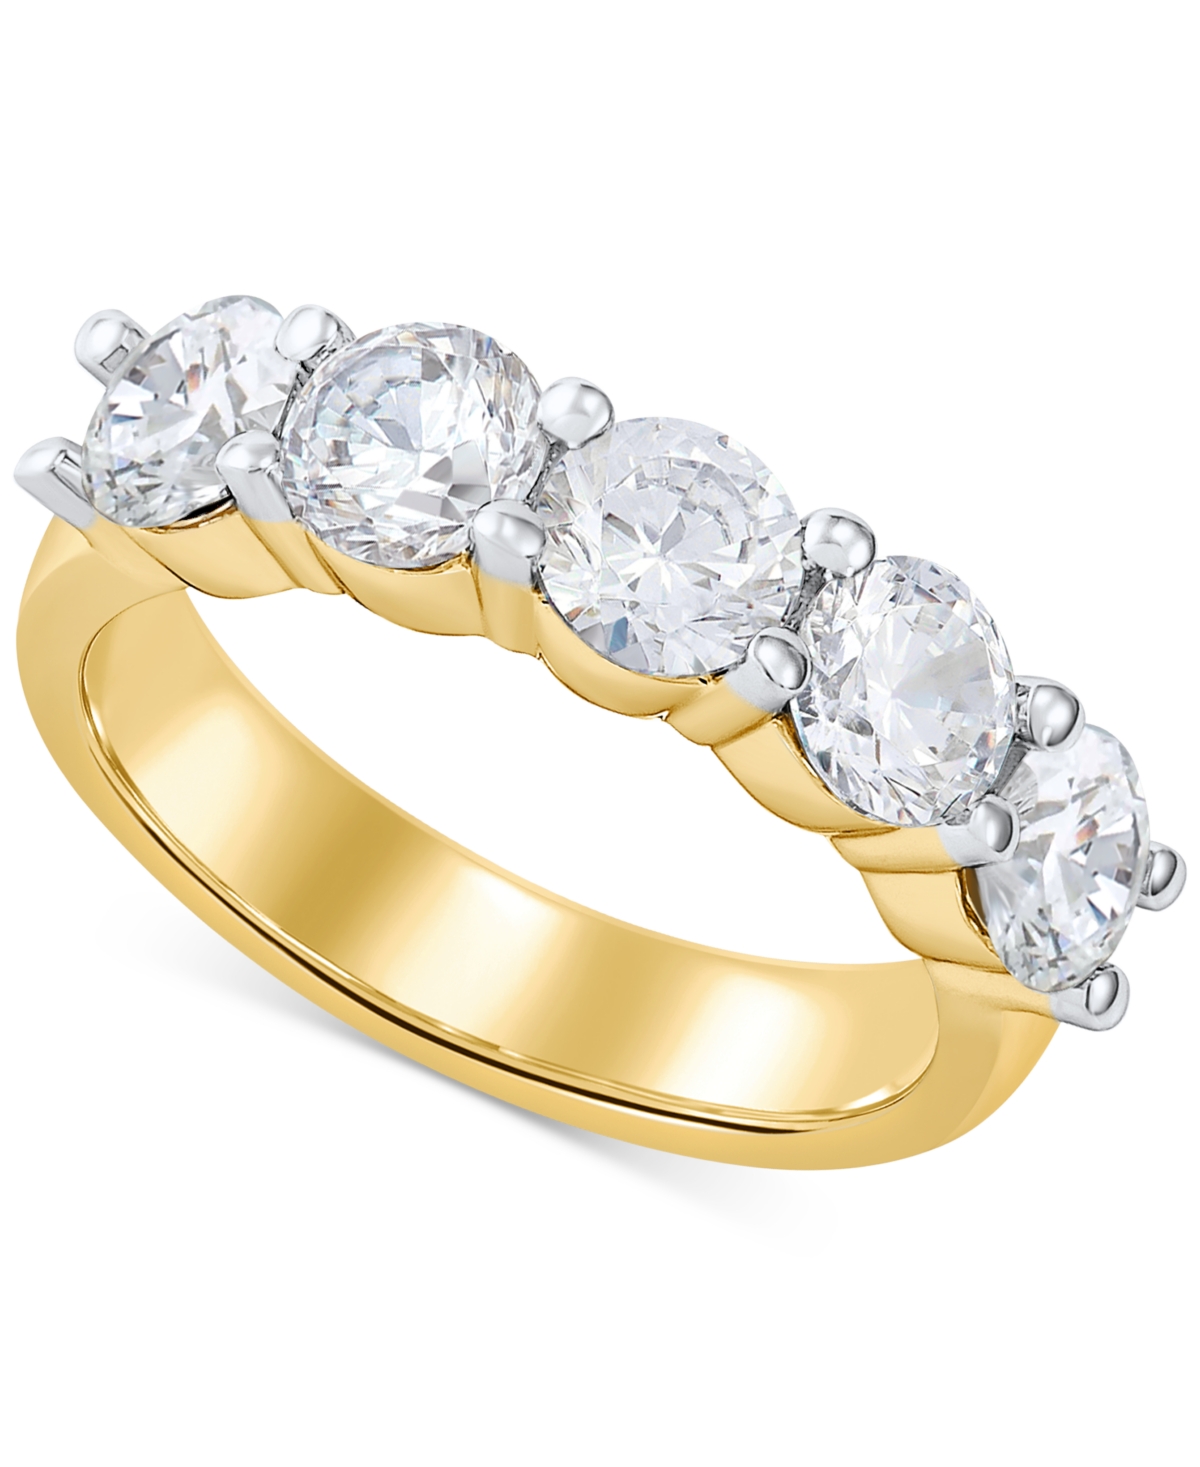 Igi Certified Lab Grown Diamond Anniversary Band (2 ct. t.w.) in 14k White or Yellow Gold - Yellow Gold